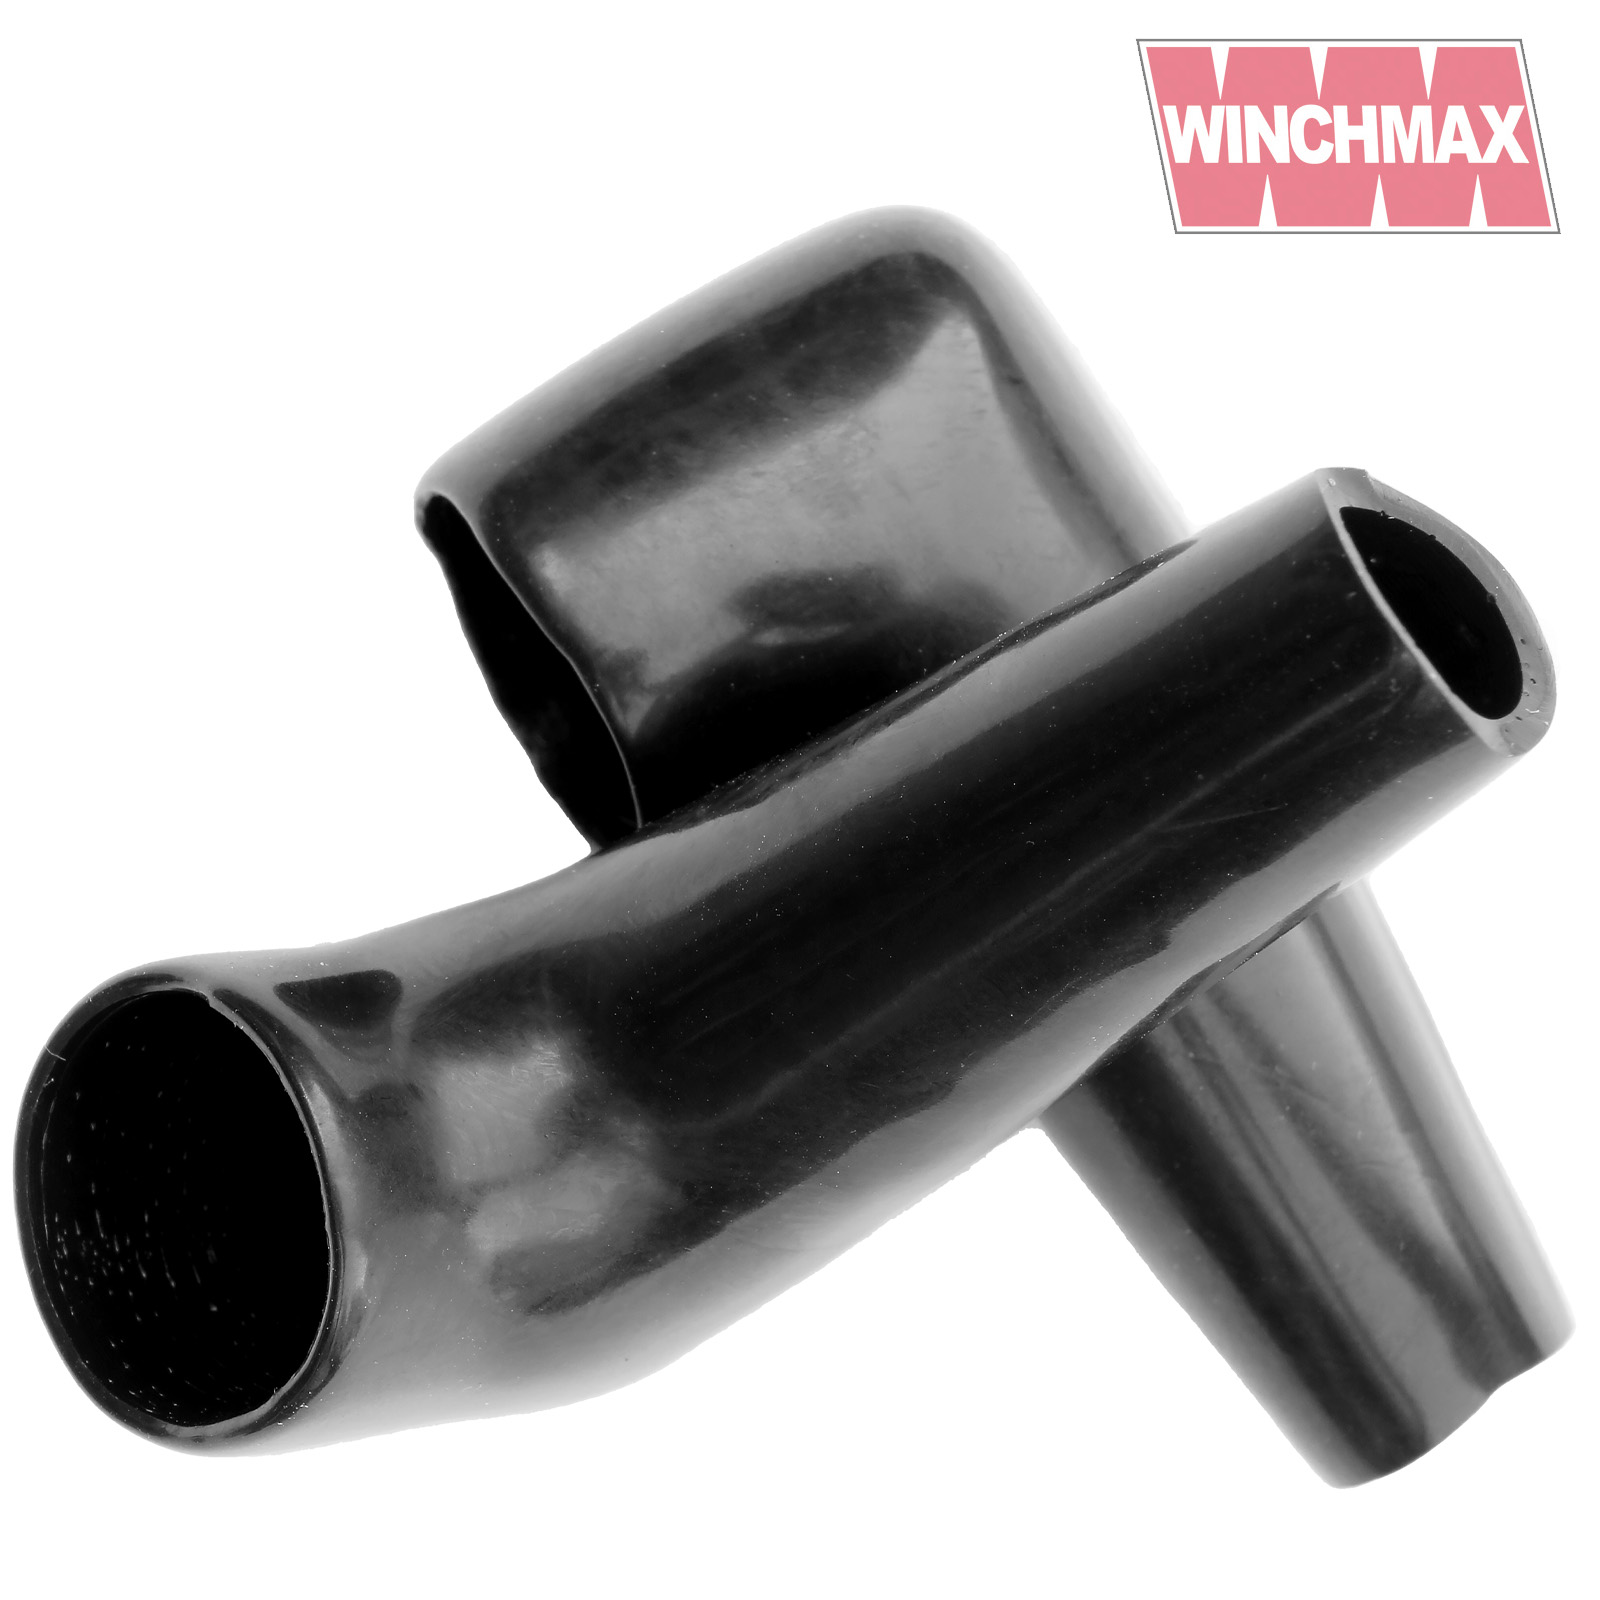 WINCHMAX ATV Battery Cable Kit